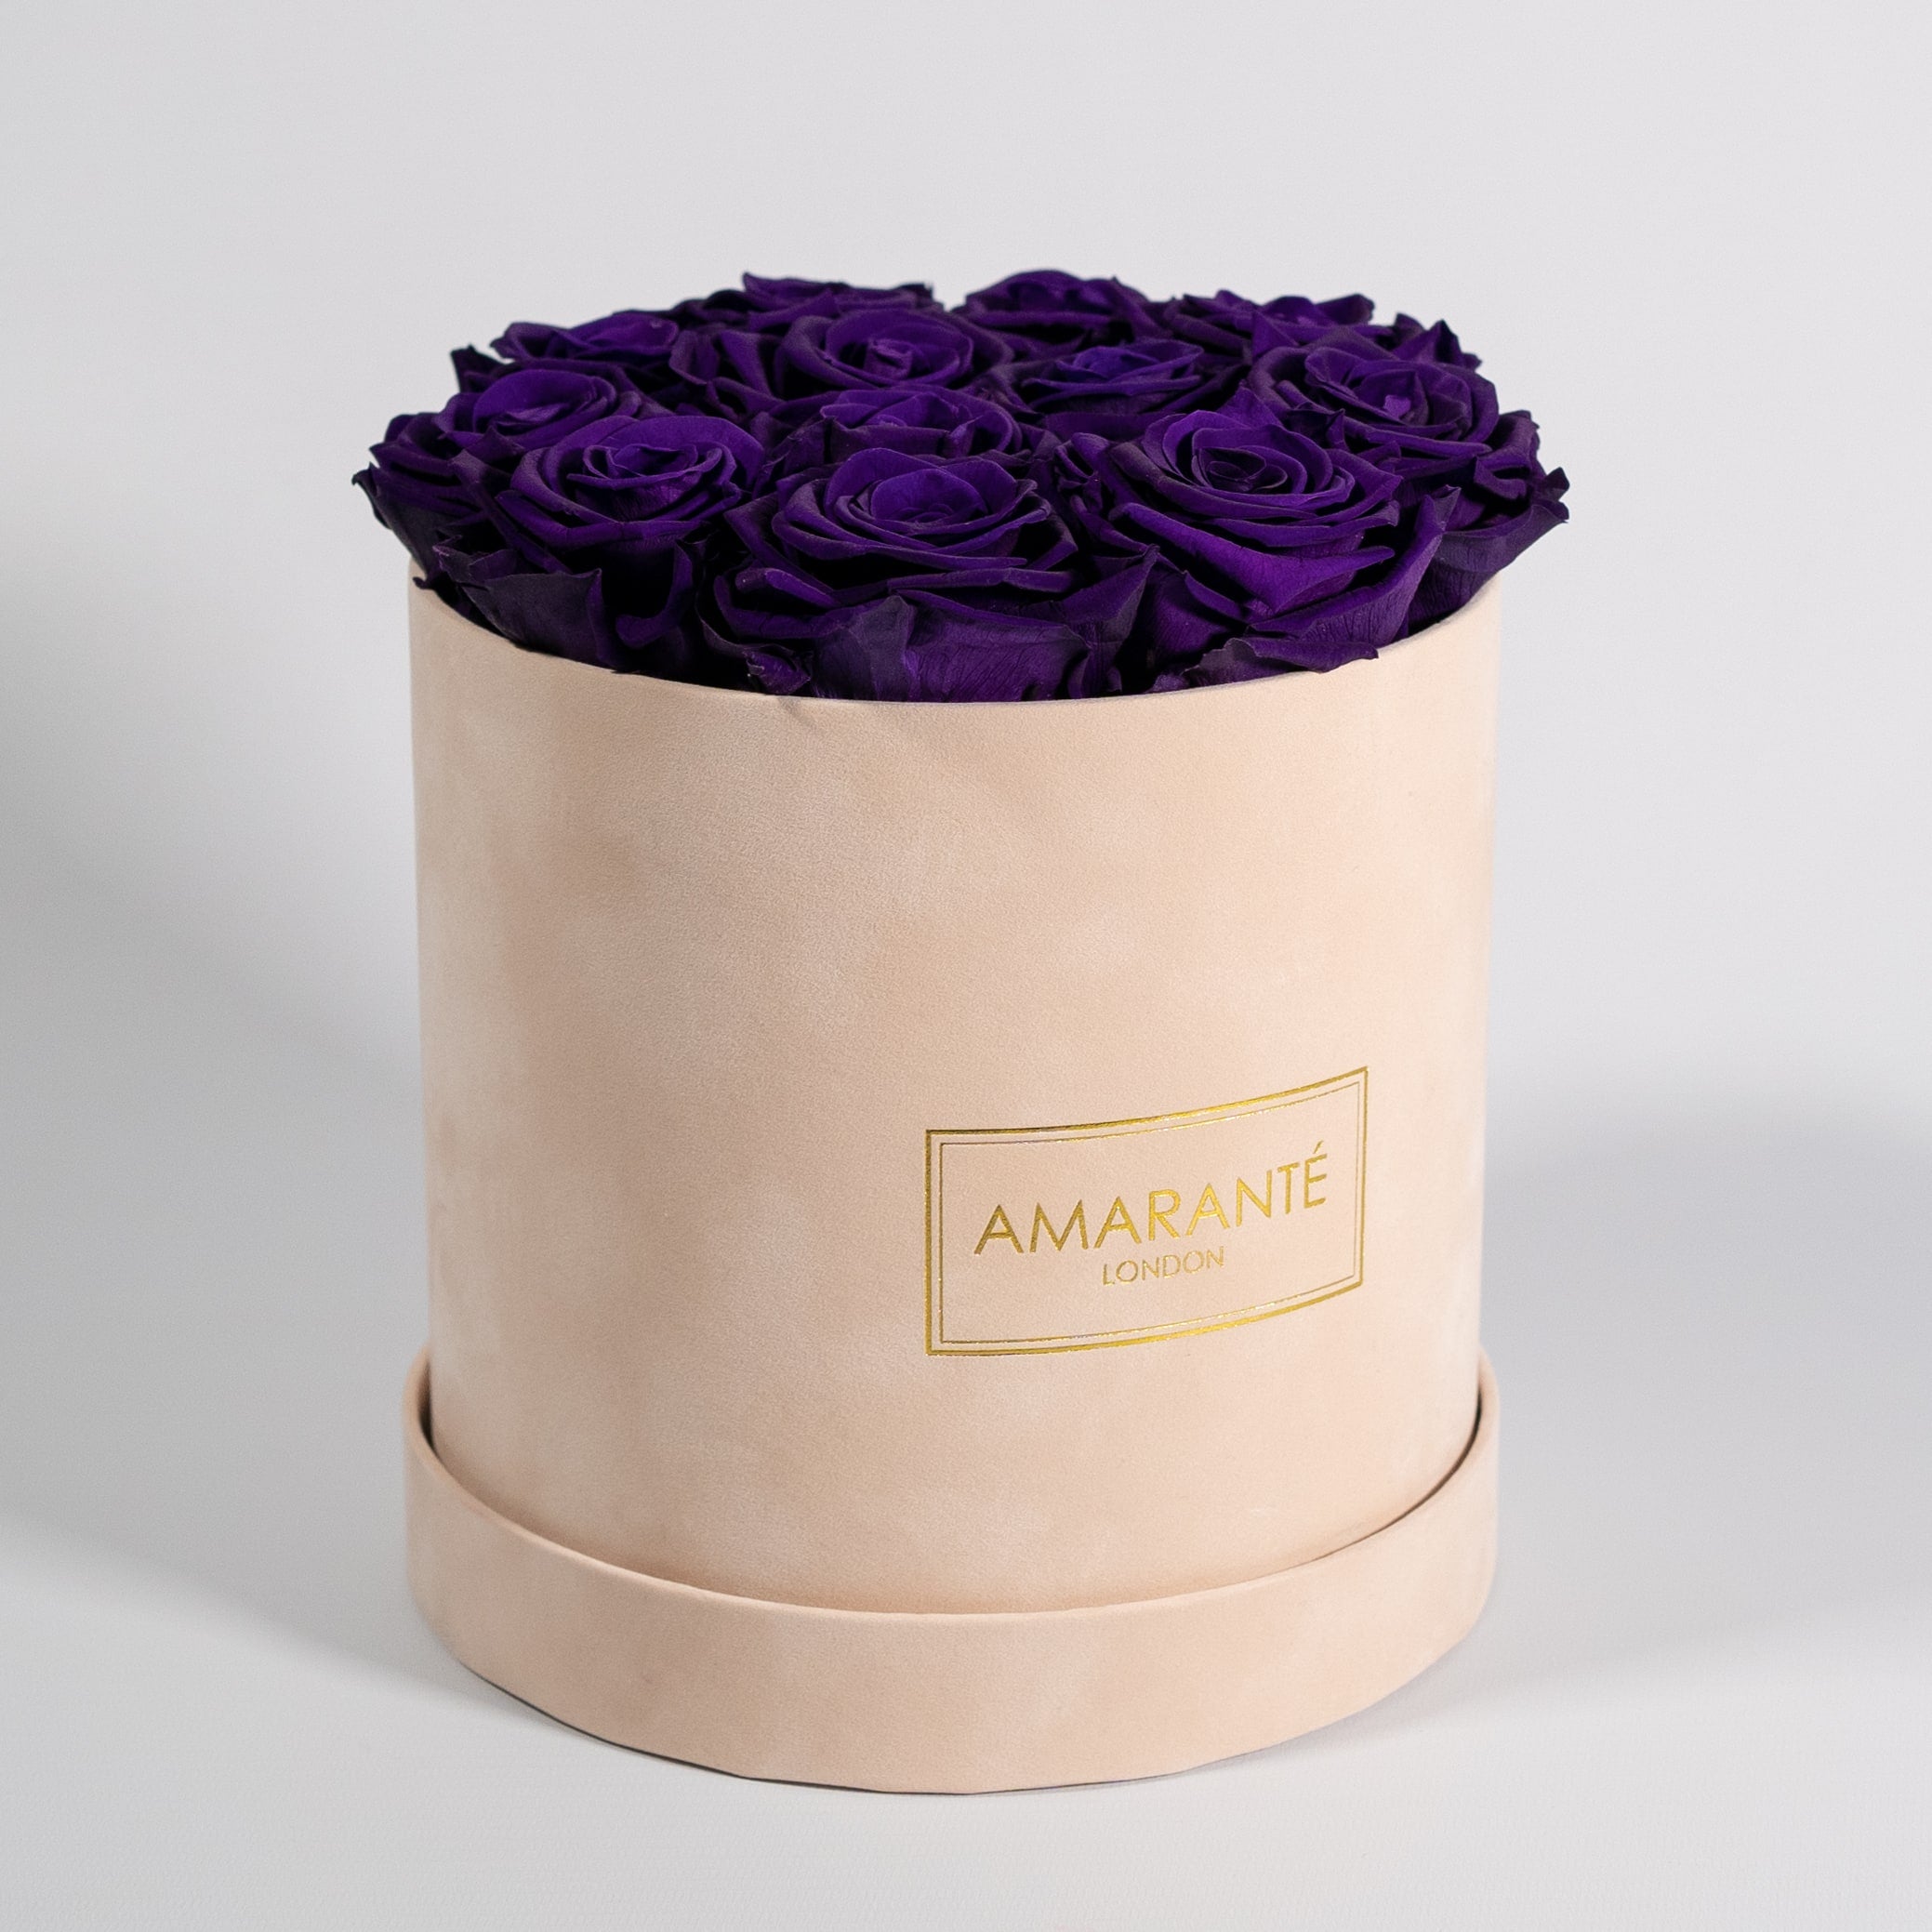 Eye-catching dark purple rose implying compassion and fantasy. 